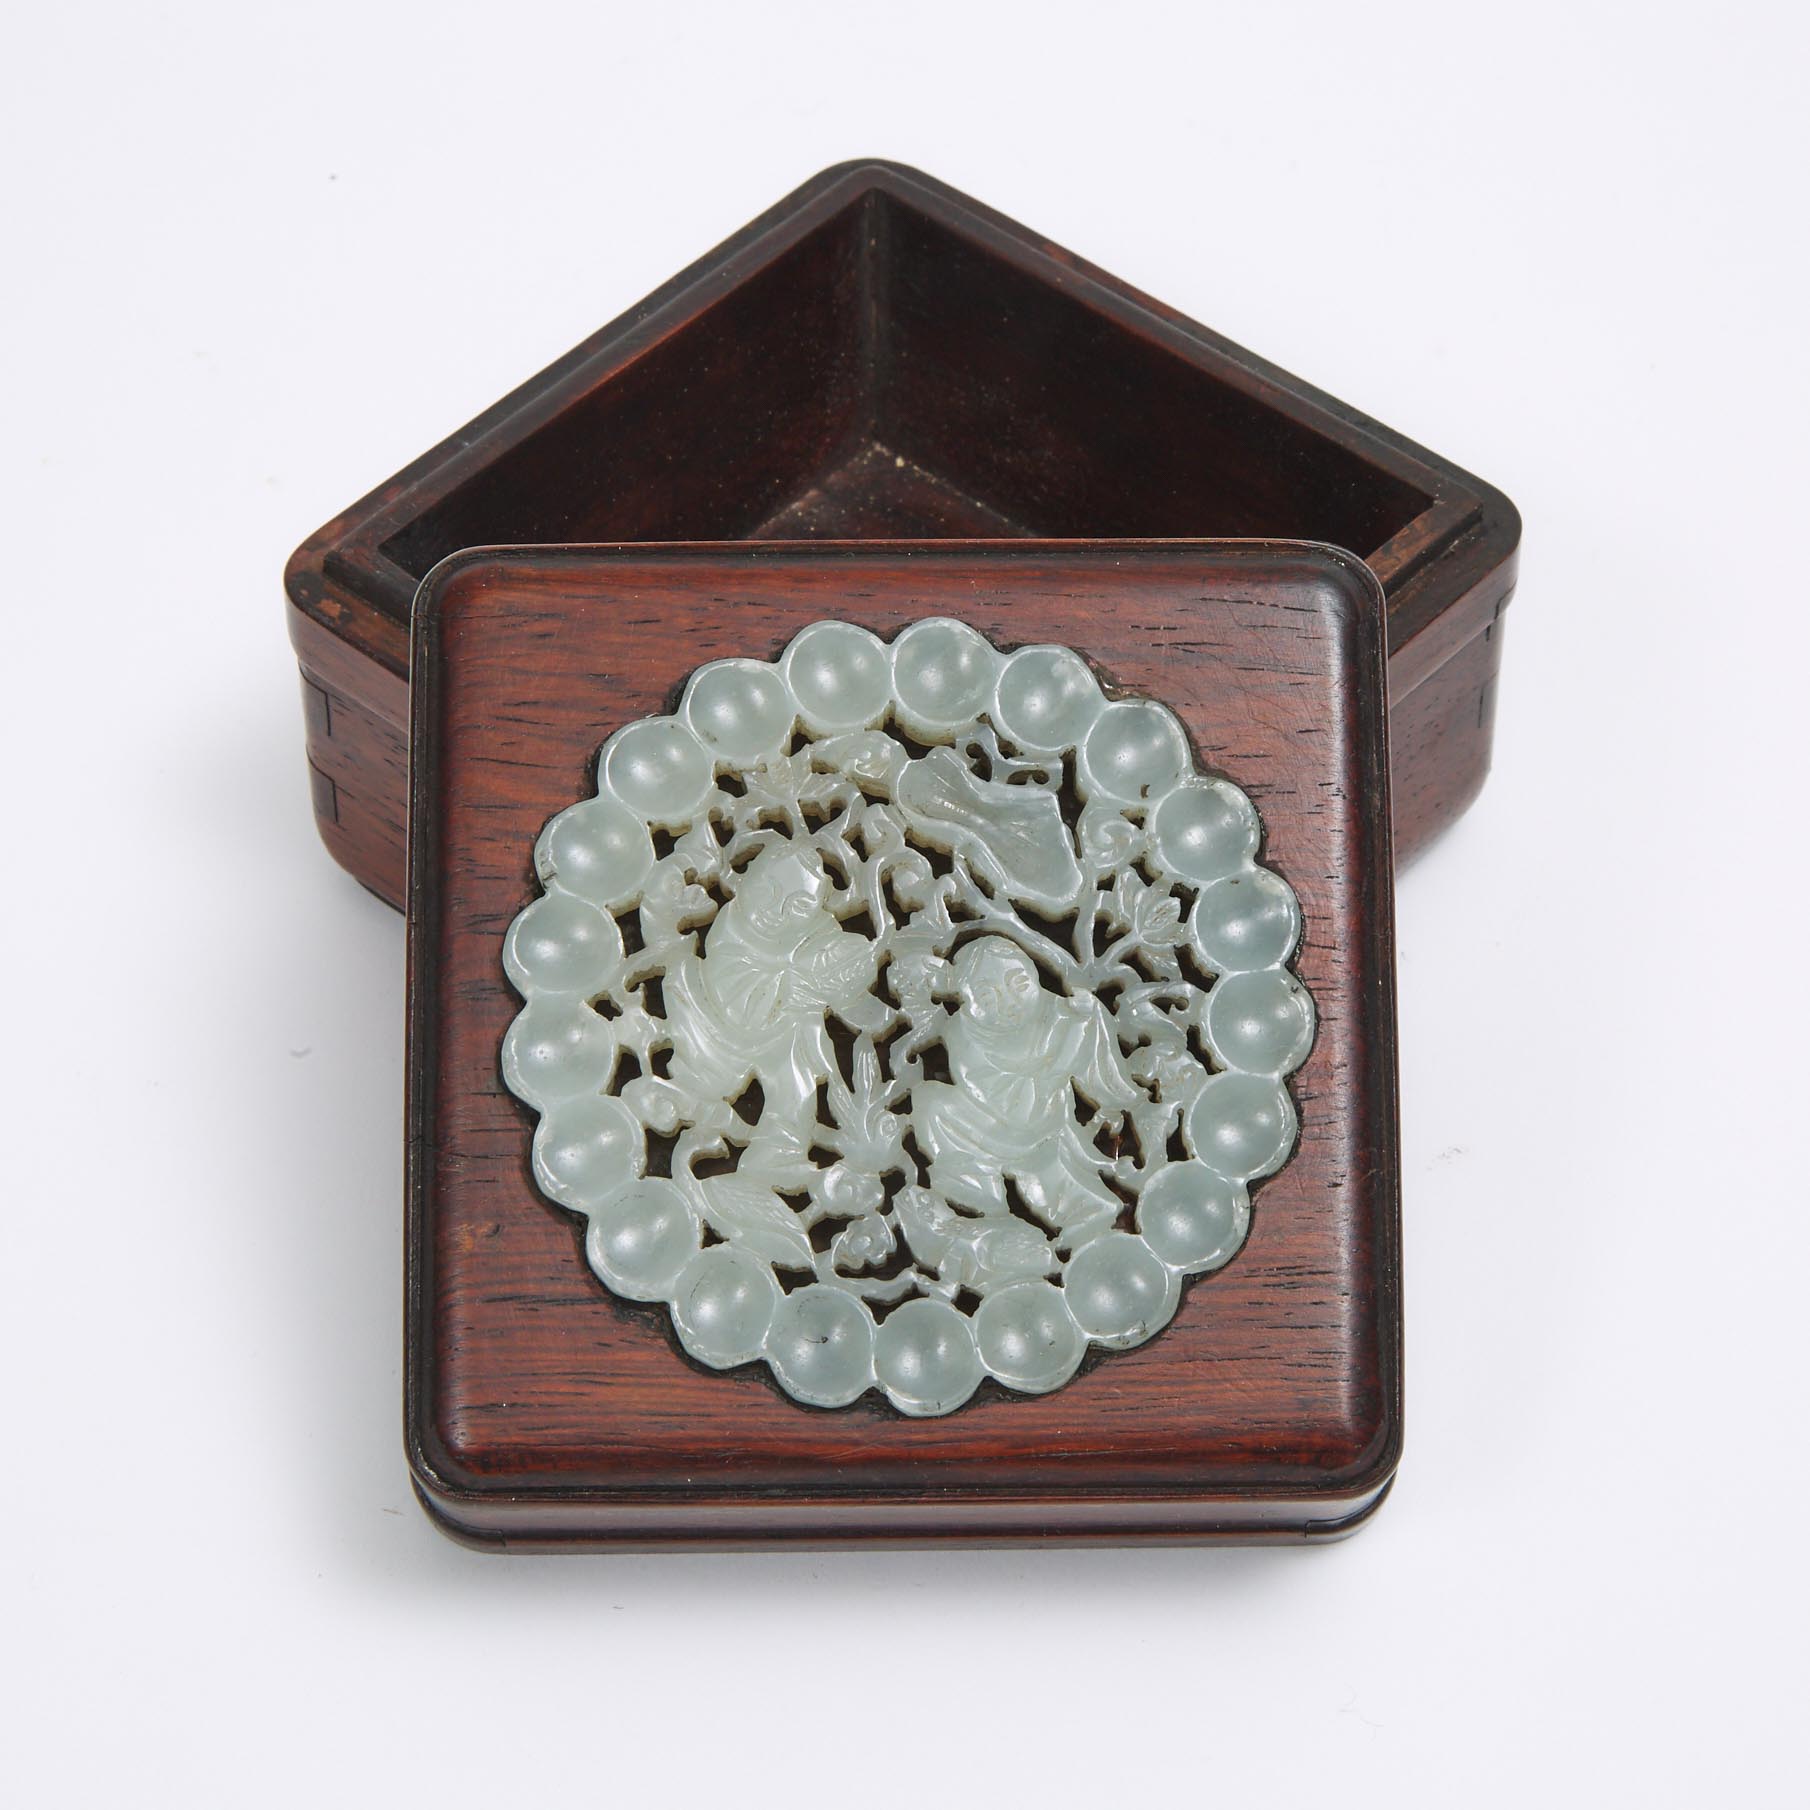 A Carved Jade 'Hehe Erxian' Plaque Inset Wood Box, 19th/20th Century